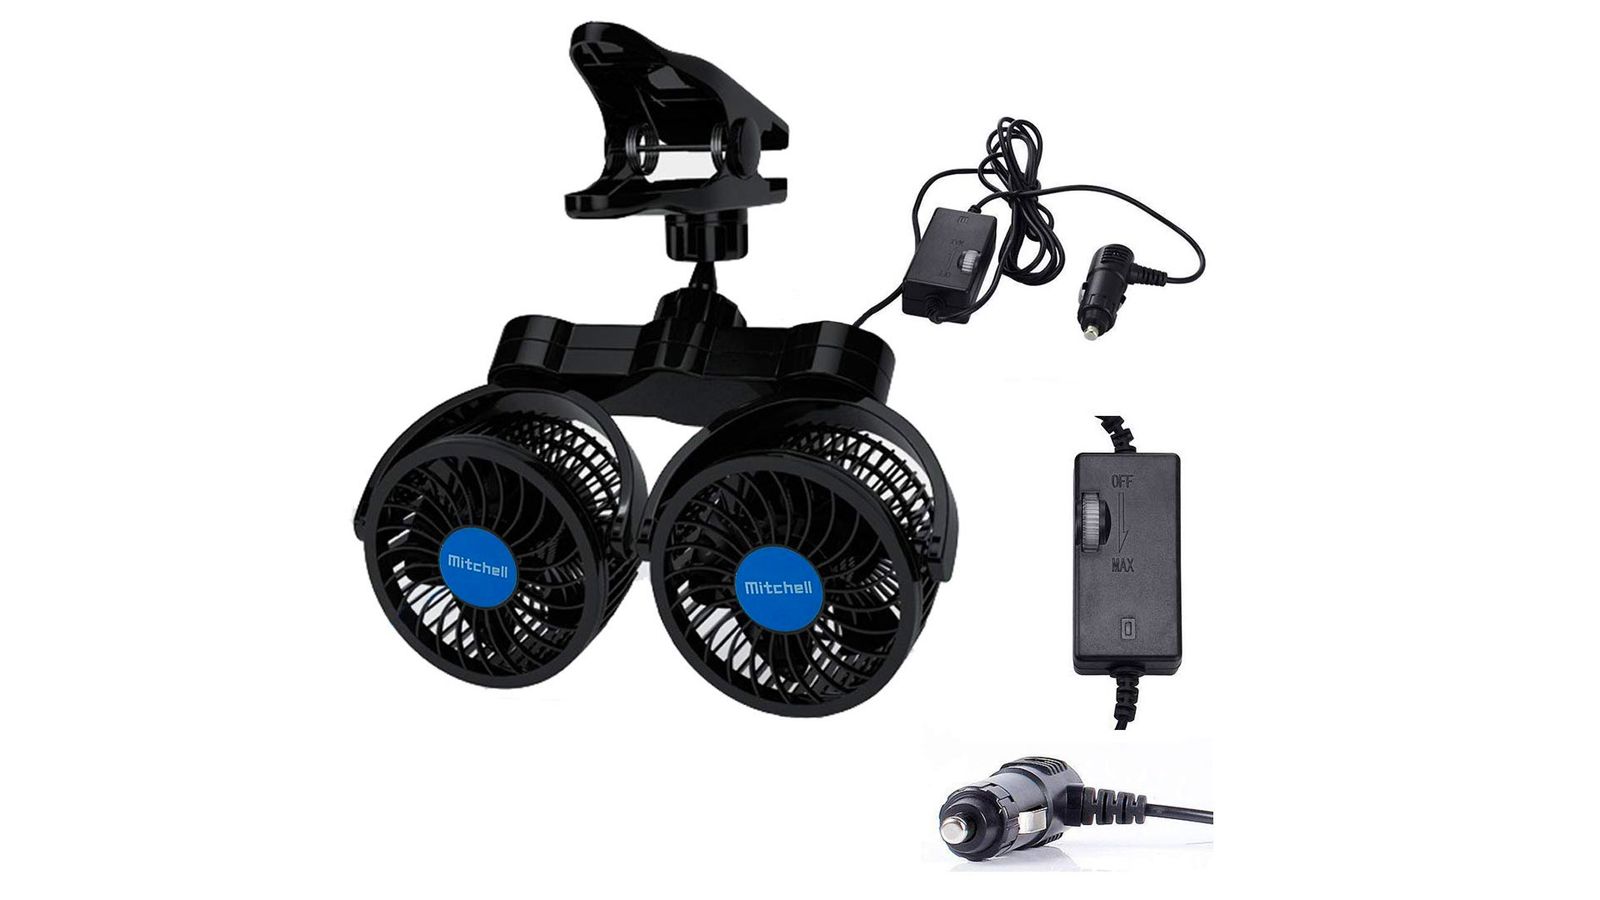 QIFUN Adjustable Dual Head Clip Fan product image of two black fans with blue details.